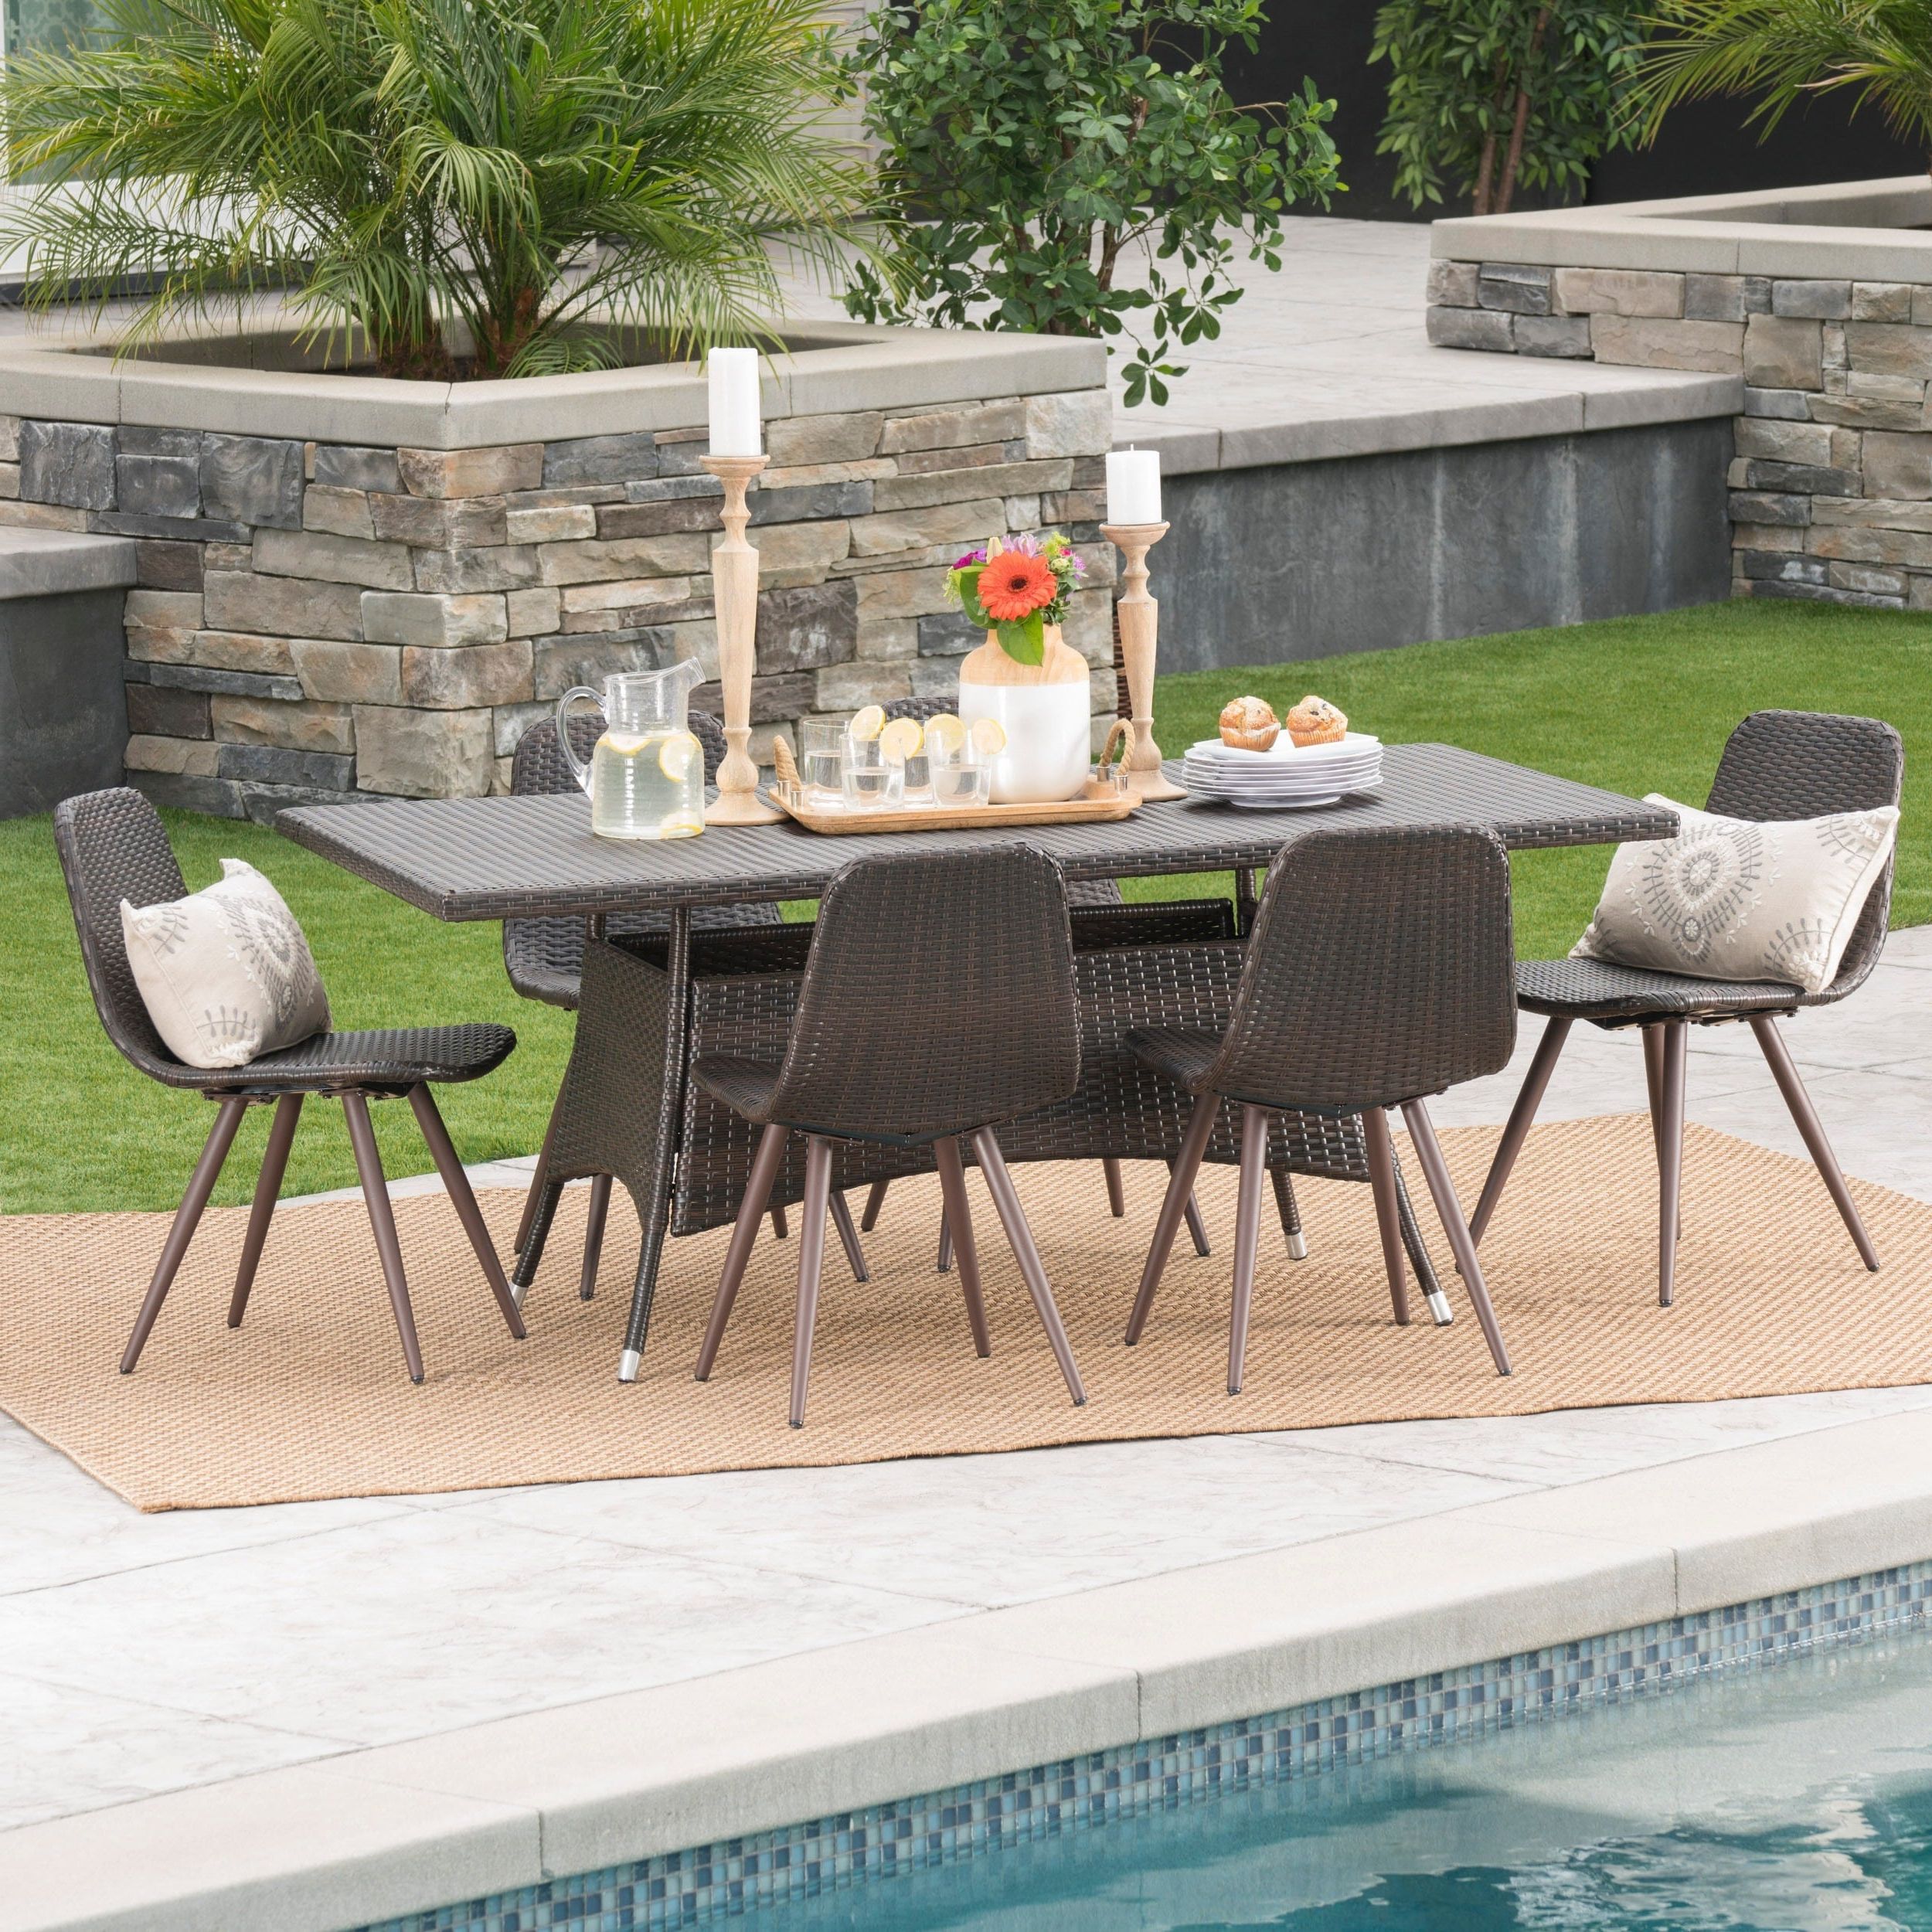 Brown Wicker Rectangular Patio Dining Sets Inside 2020 Ezra Outdoor 7 Piece Rectangle Wicker Dining Setbrown 7 Piece Sets (View 13 of 15)